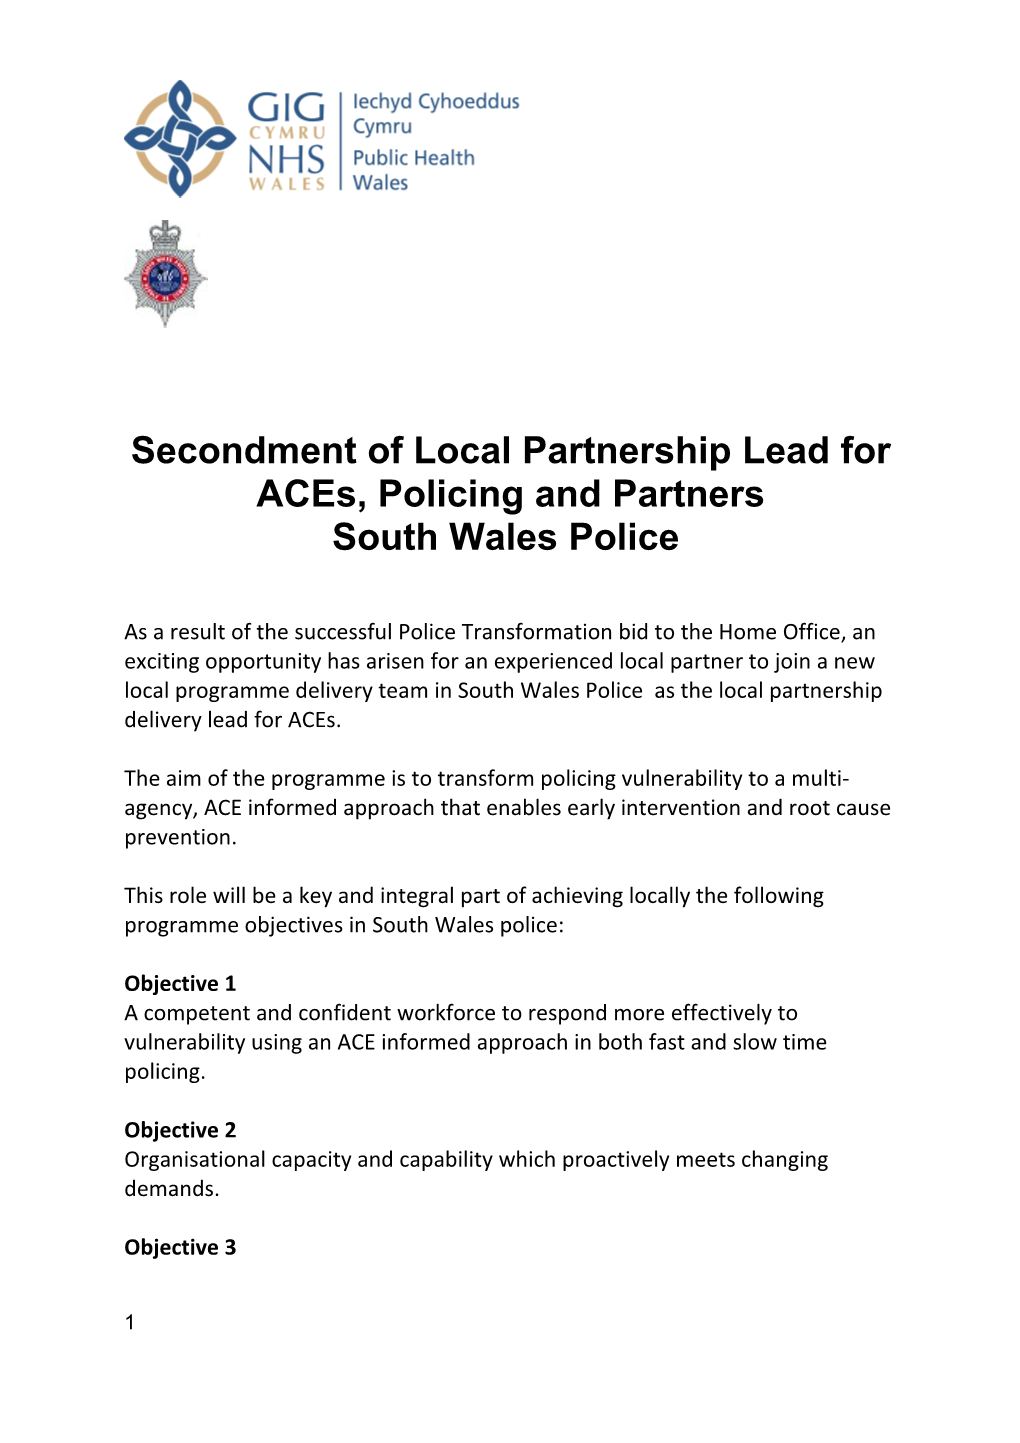 Secondment of Local Partnership Lead for Aces, Policing and Partners